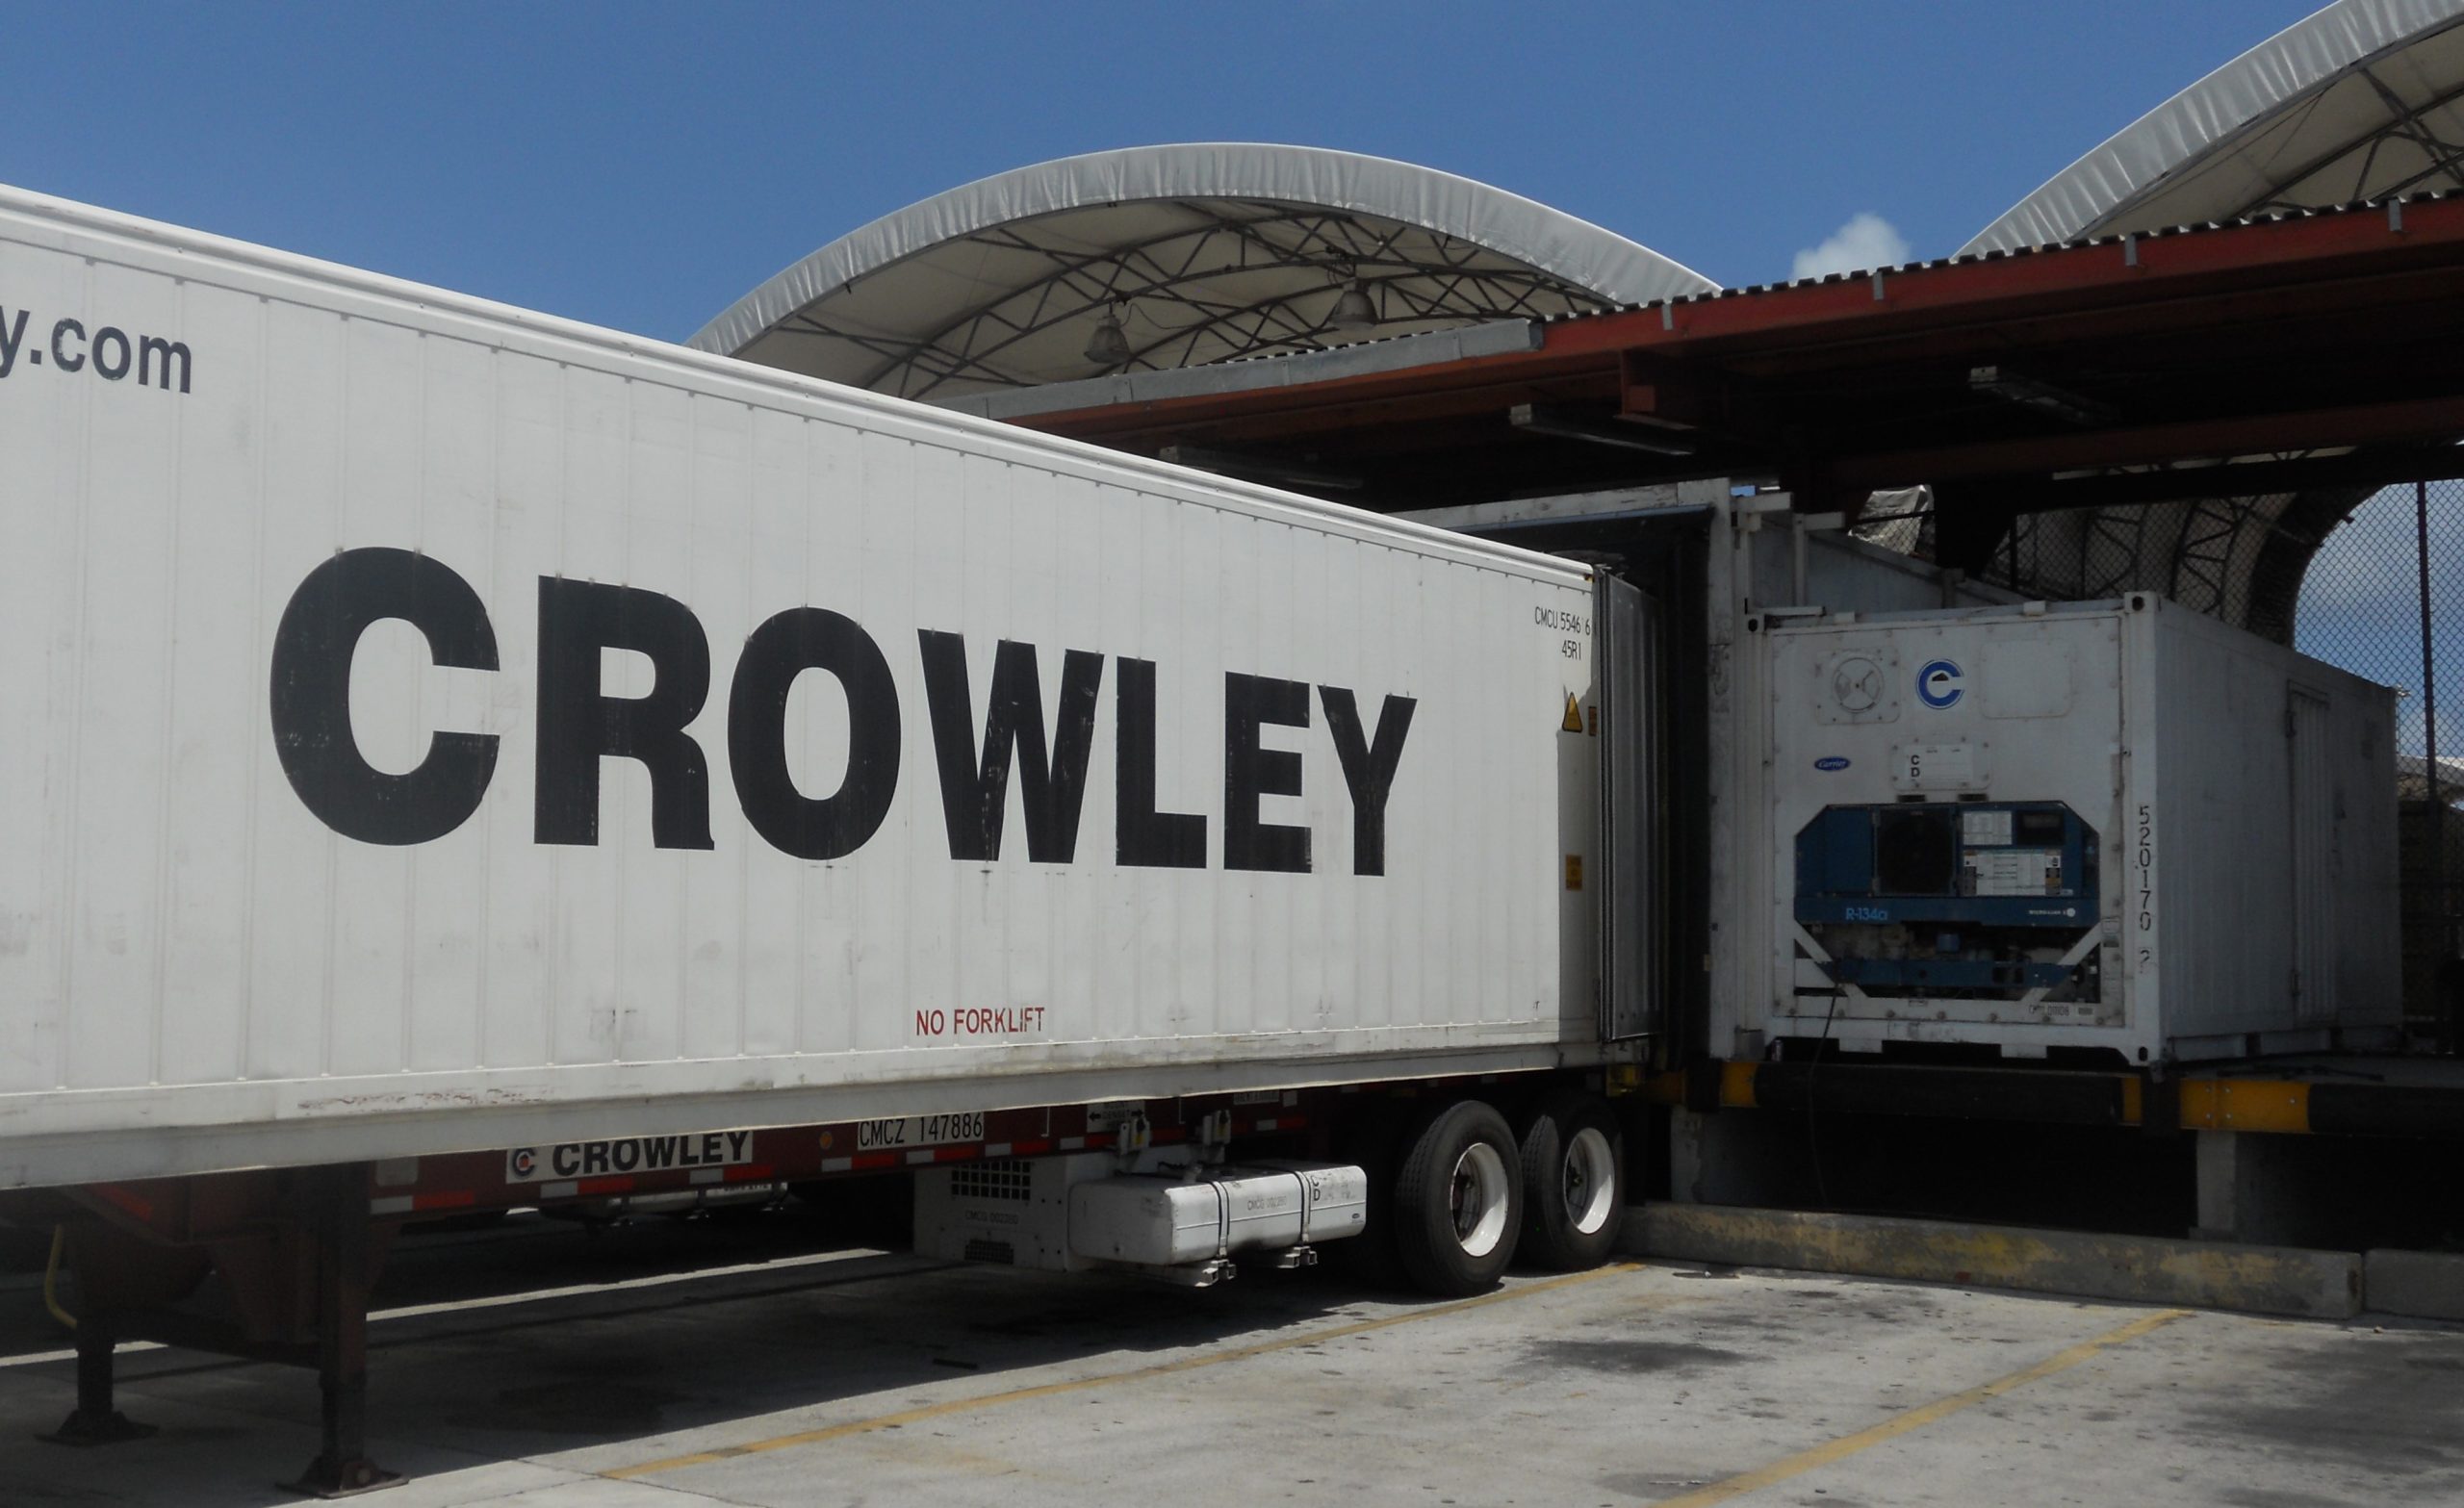 Crowley has served perishables shippers for over 50 years by providing a host of cold-chain transportation and logistics services.